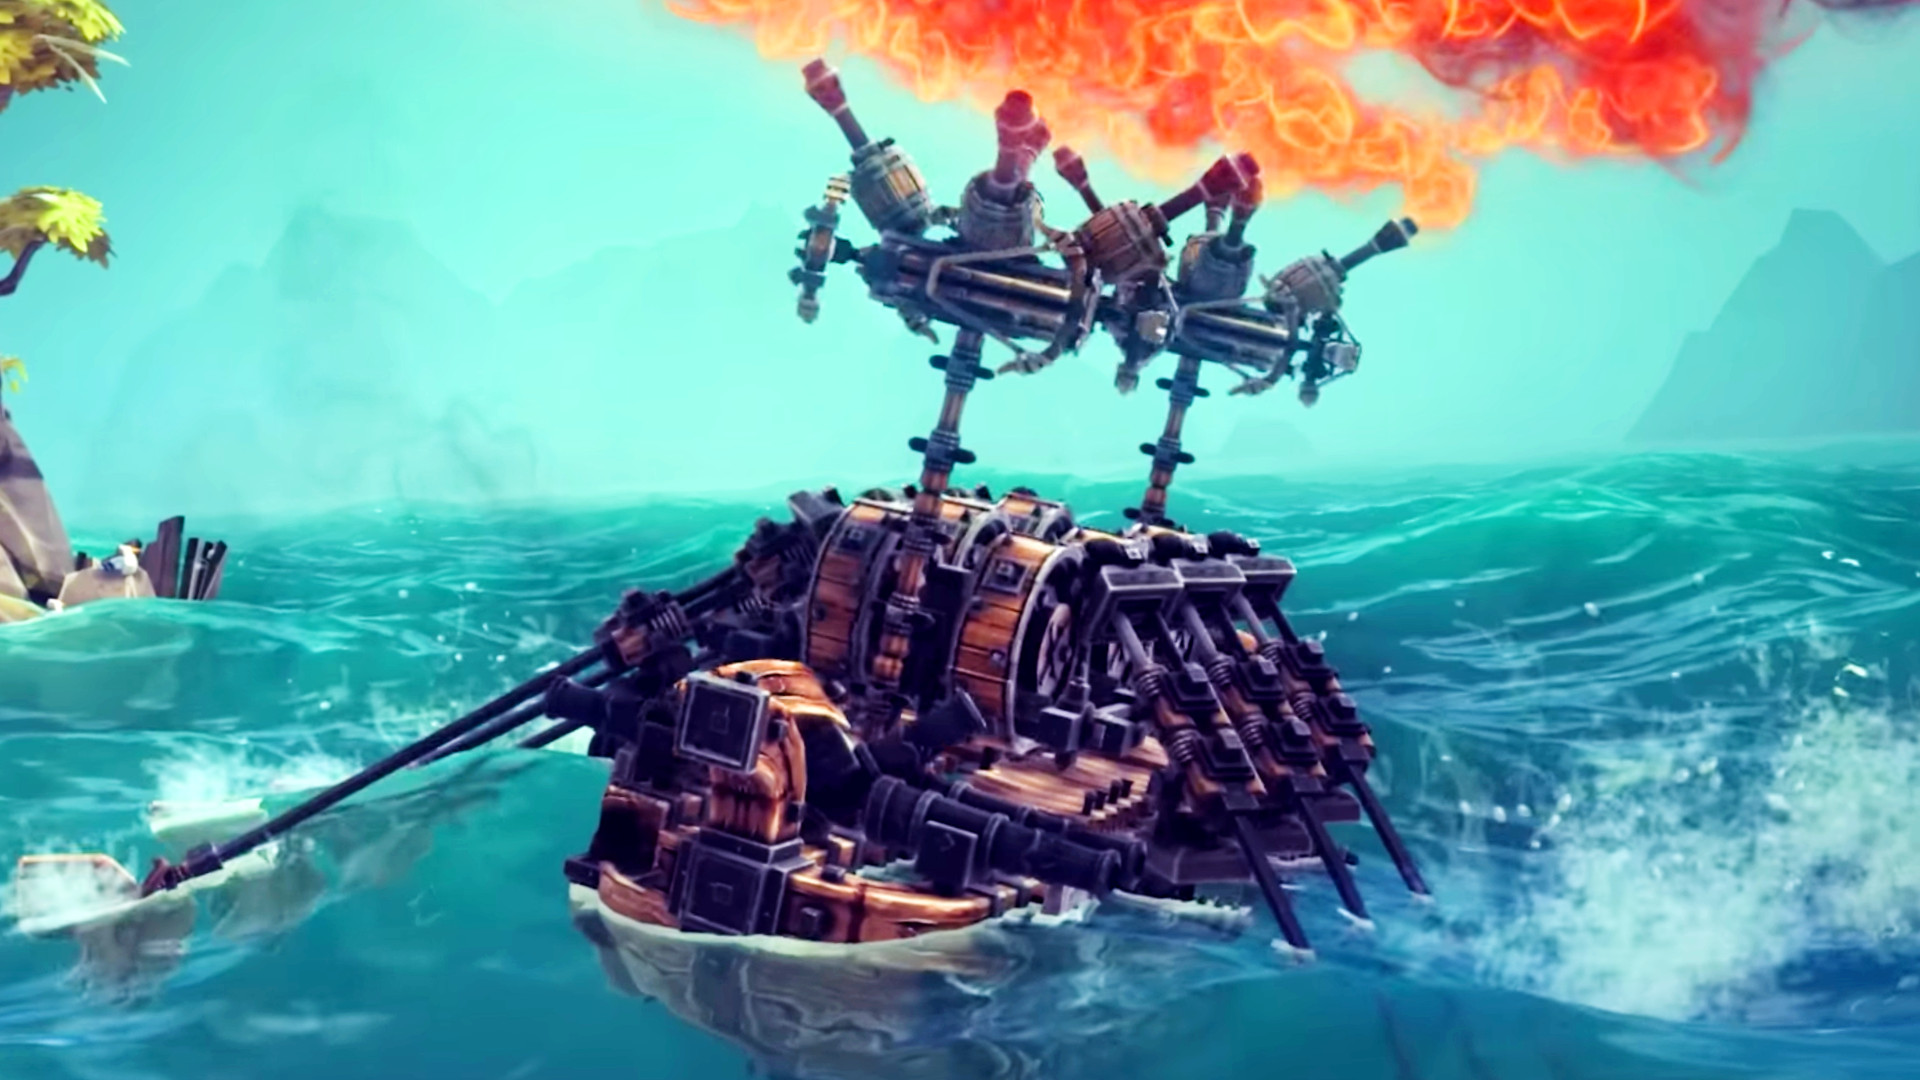 Beloved sandbox game's new expansion boasts awesome explosion physics